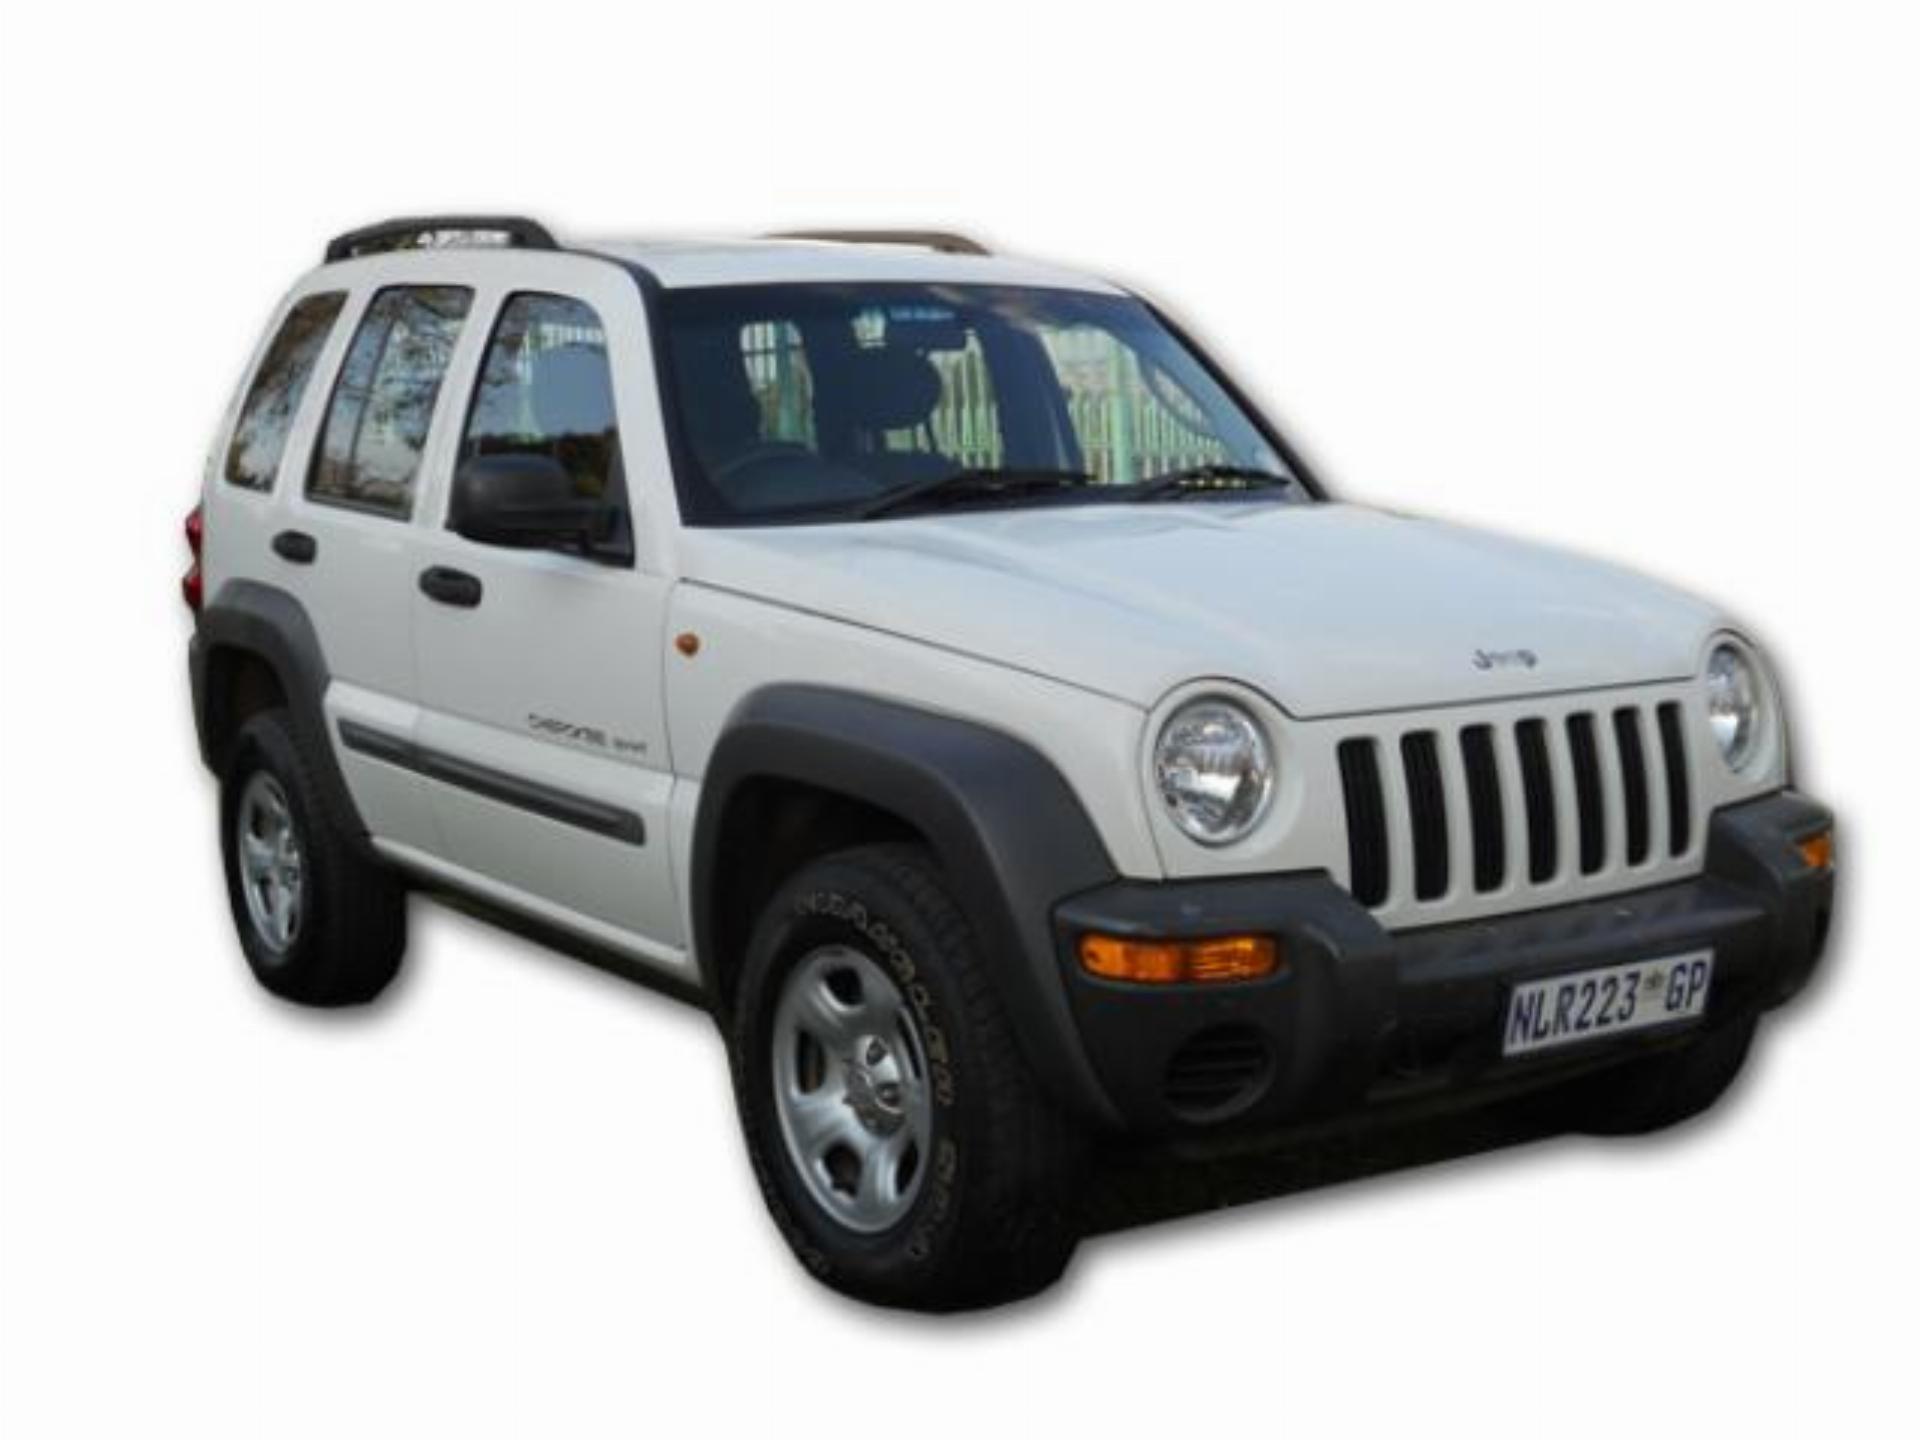 Used Jeep Cherokee 2.5 CRD 2003 on auction PV1000074